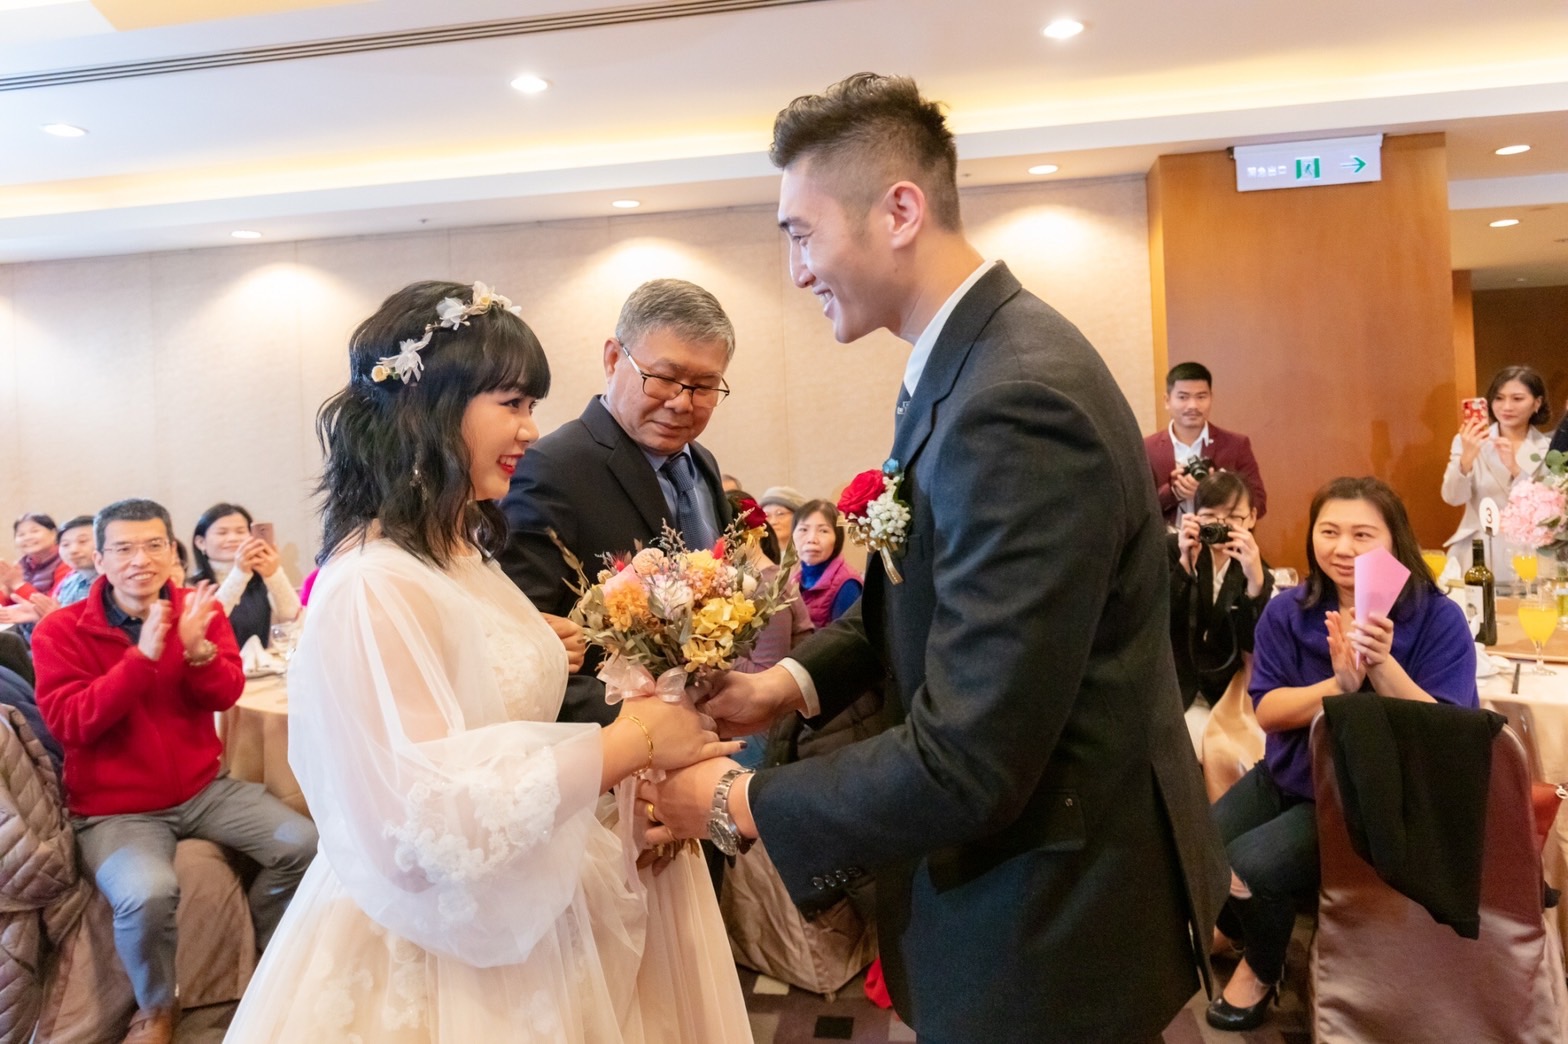 A happy marriage. (Photo / Provided & Authorized by @Somethingabouttaiwan)